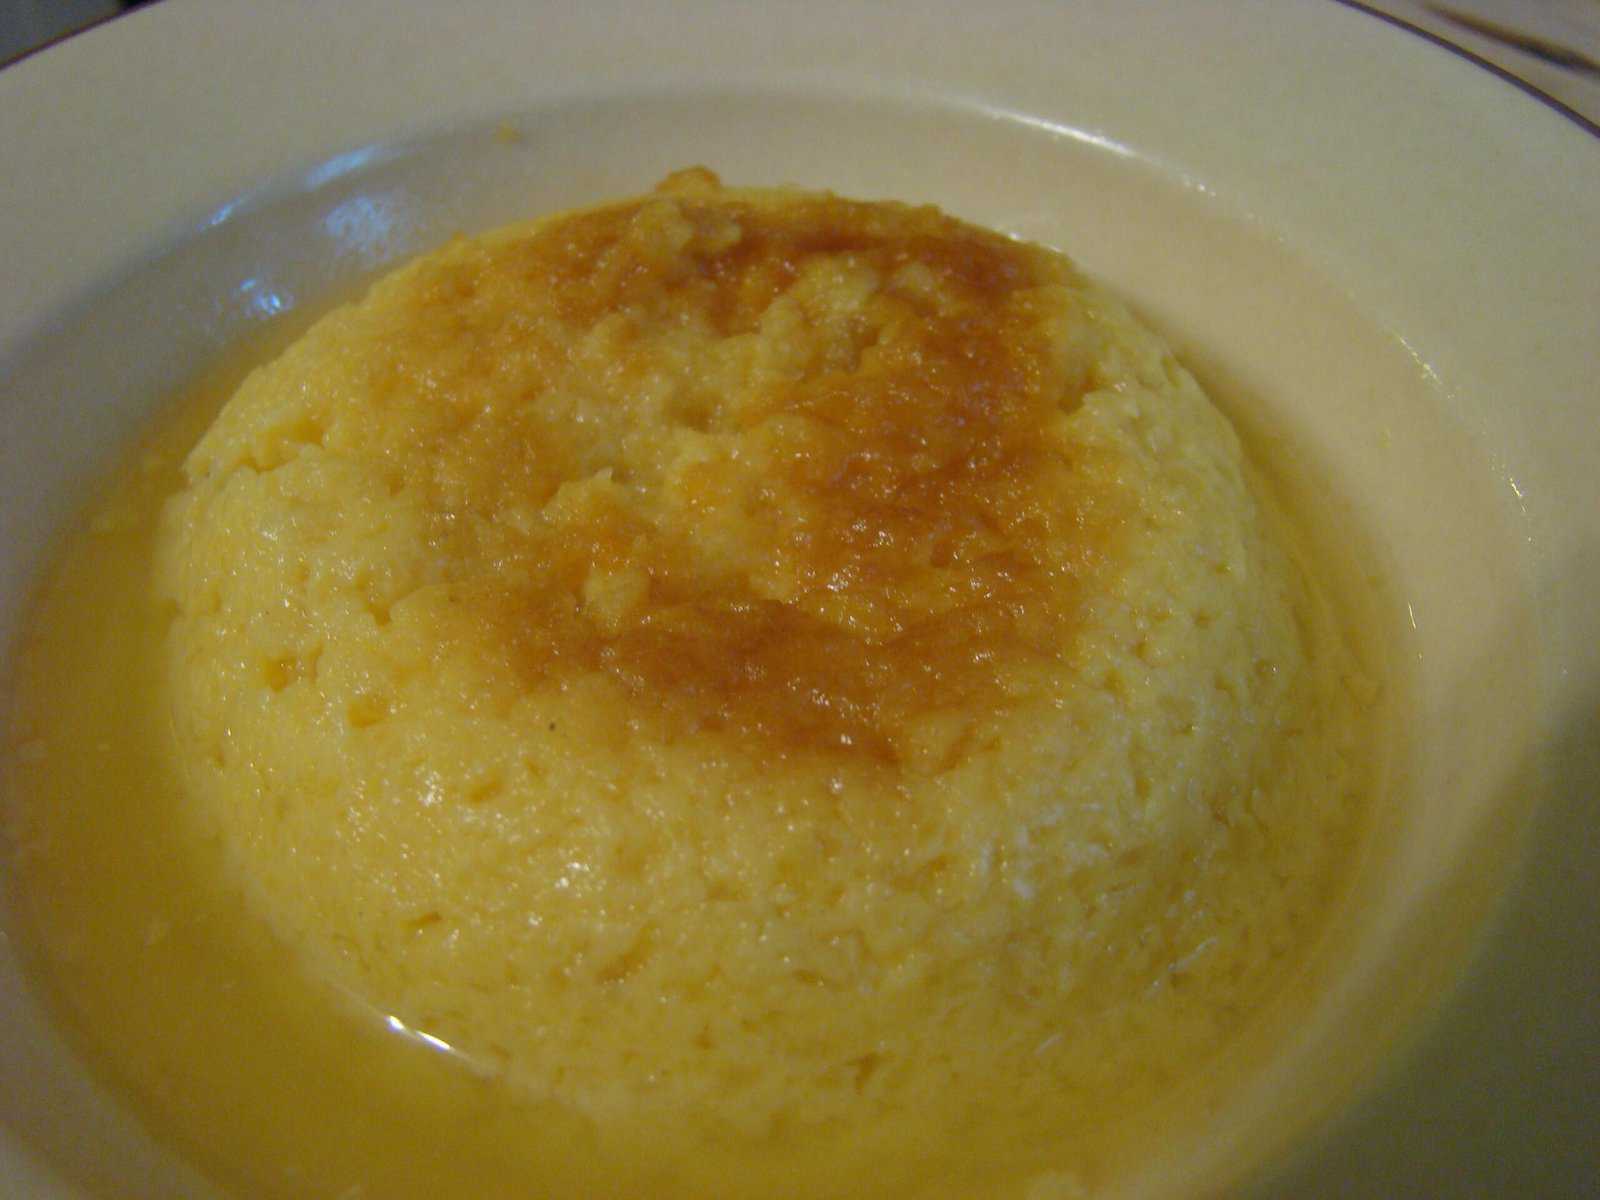 Delicious Colombian Pineapple Custard – A Tropical Treat